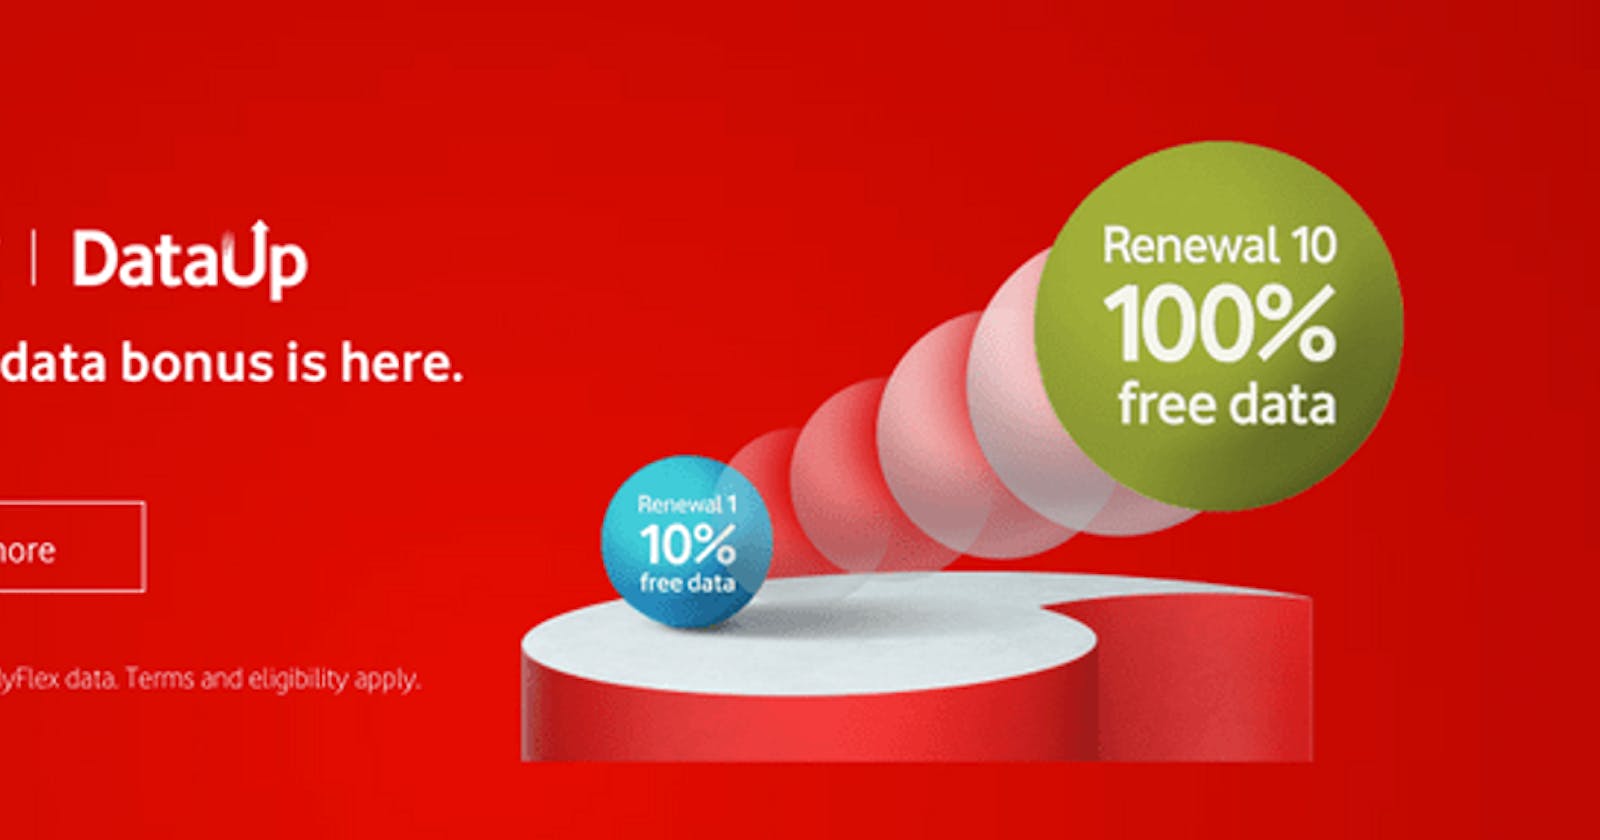 Case study: Vodafone DataUp UX